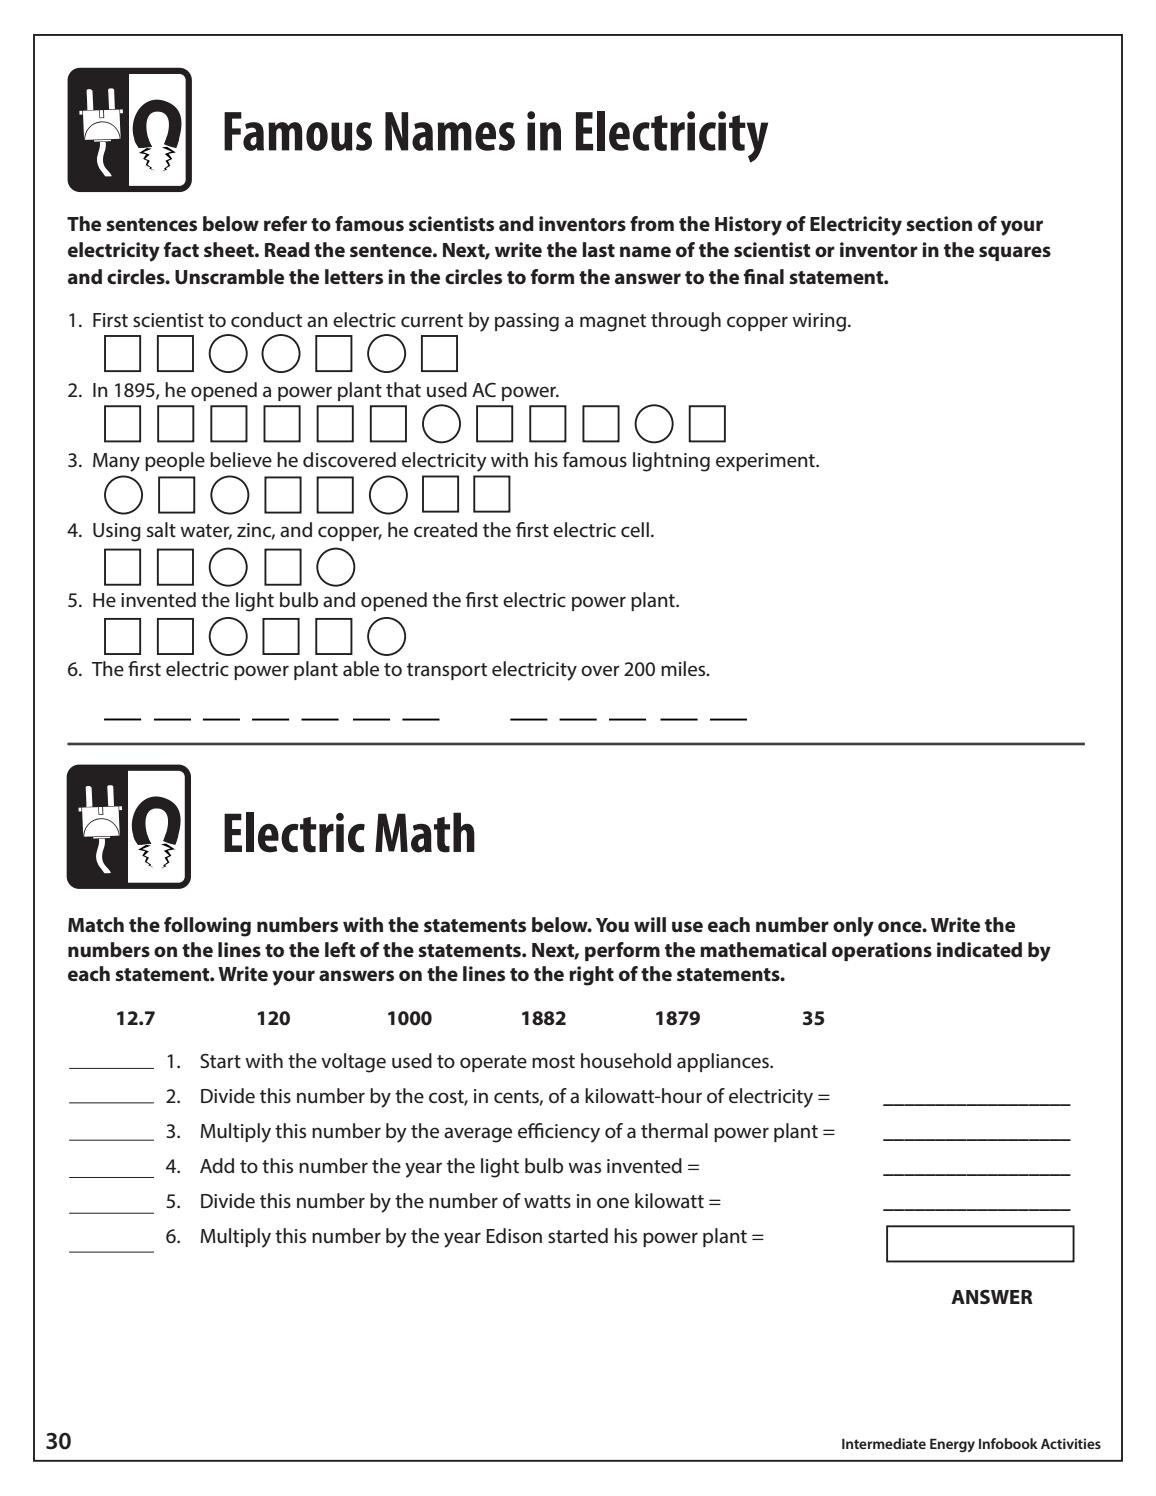 Electrical Power Worksheet Answers Intermediate Energy Infobook Activities by Need Project issuu